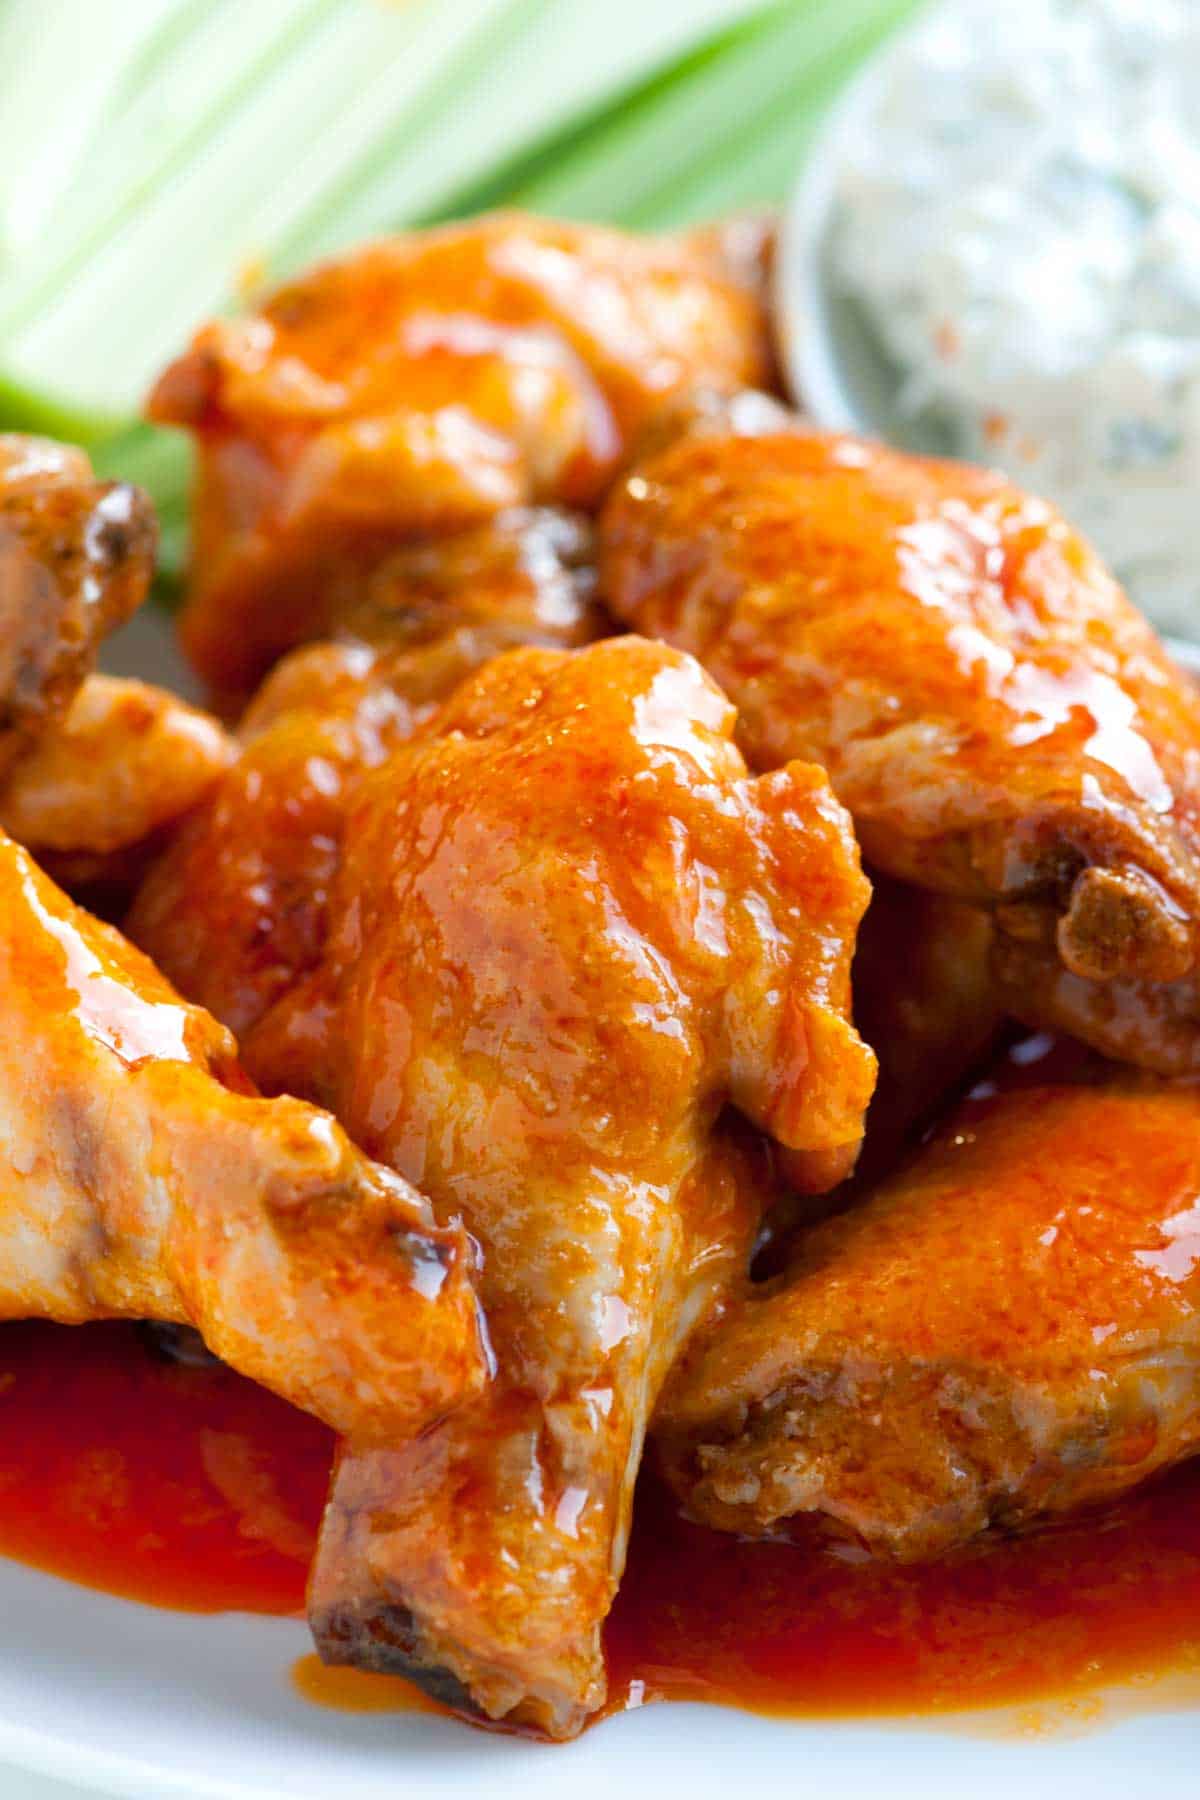 Hot and crispy baked buffalo chicken wings